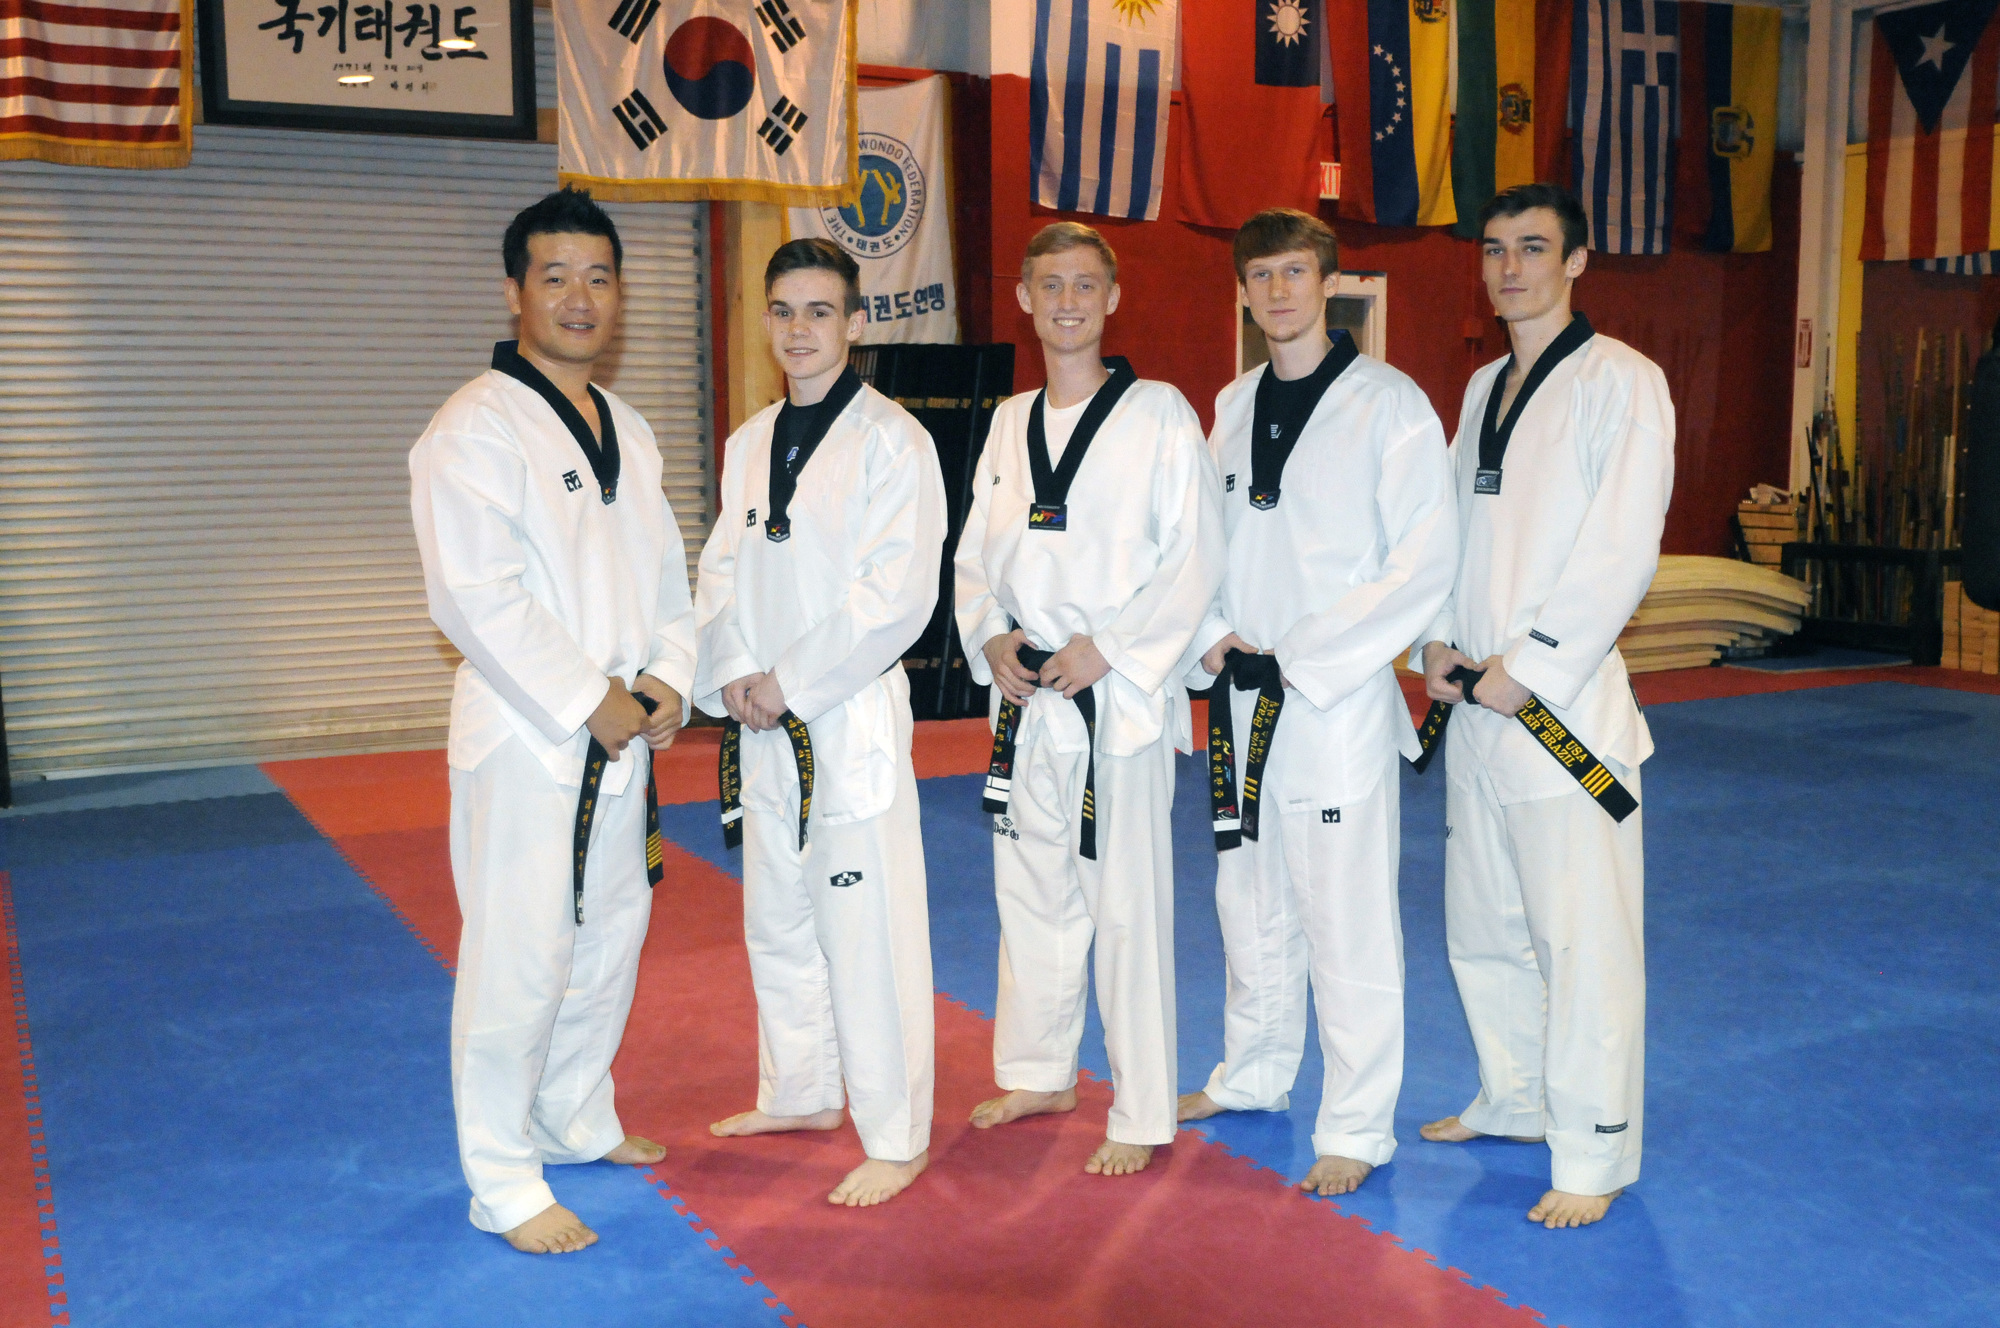 Deven Rutland, Isaac Weintraub, Travis Brazil and Tyler Brazil, pictured with Master Jin Hwang, far left, represented Red Tiger Martial Arts at the 2015 USAT National Championships this past July.